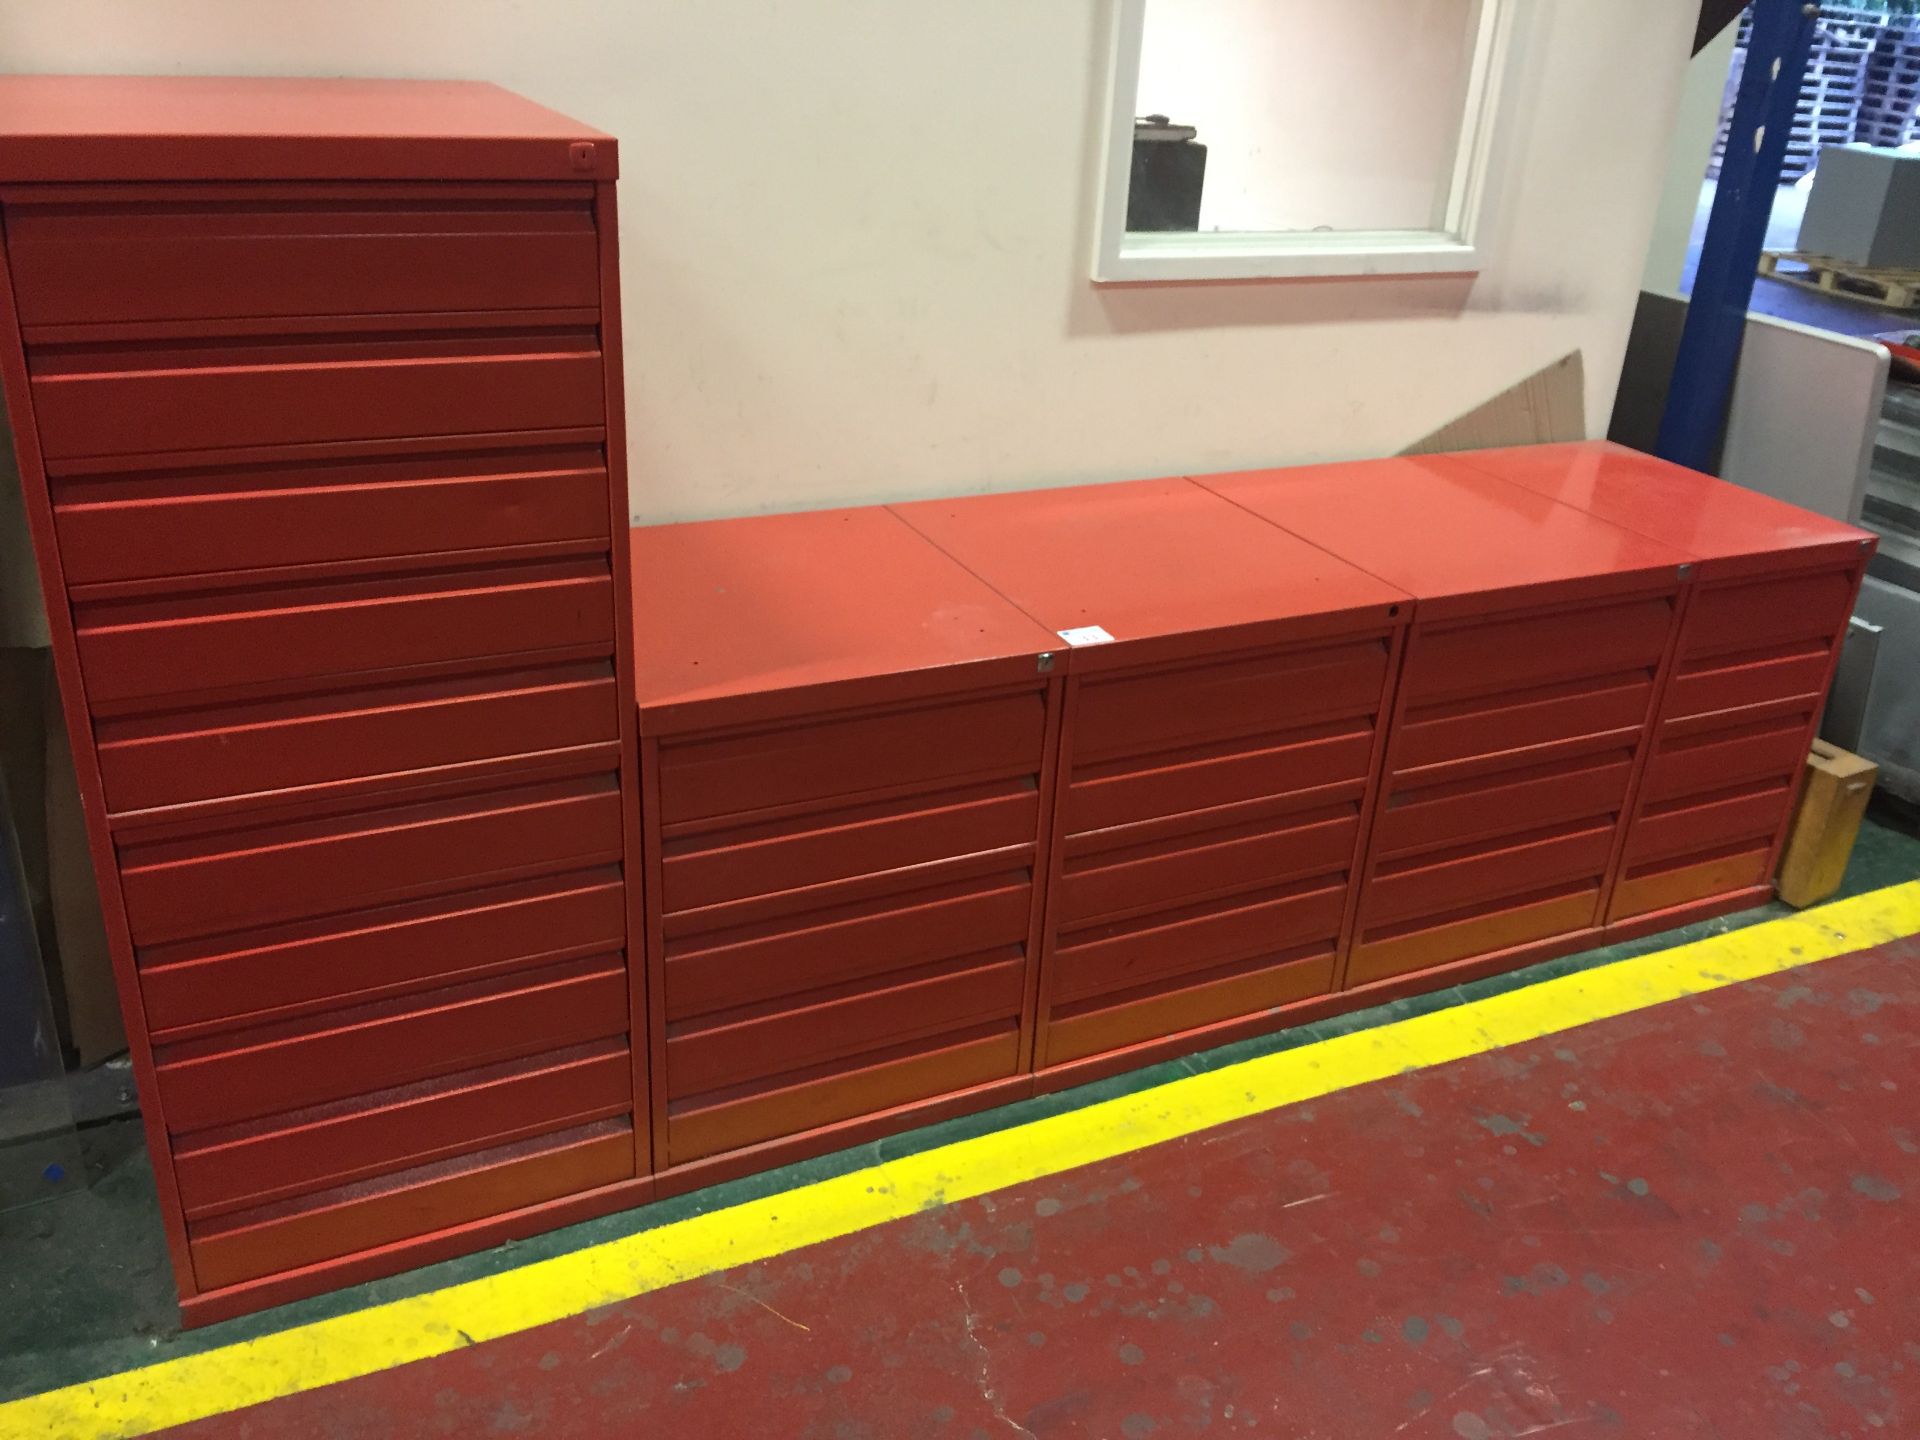 4 x 5 Drawer red cabinets and 1 x 10 drawer cabinet